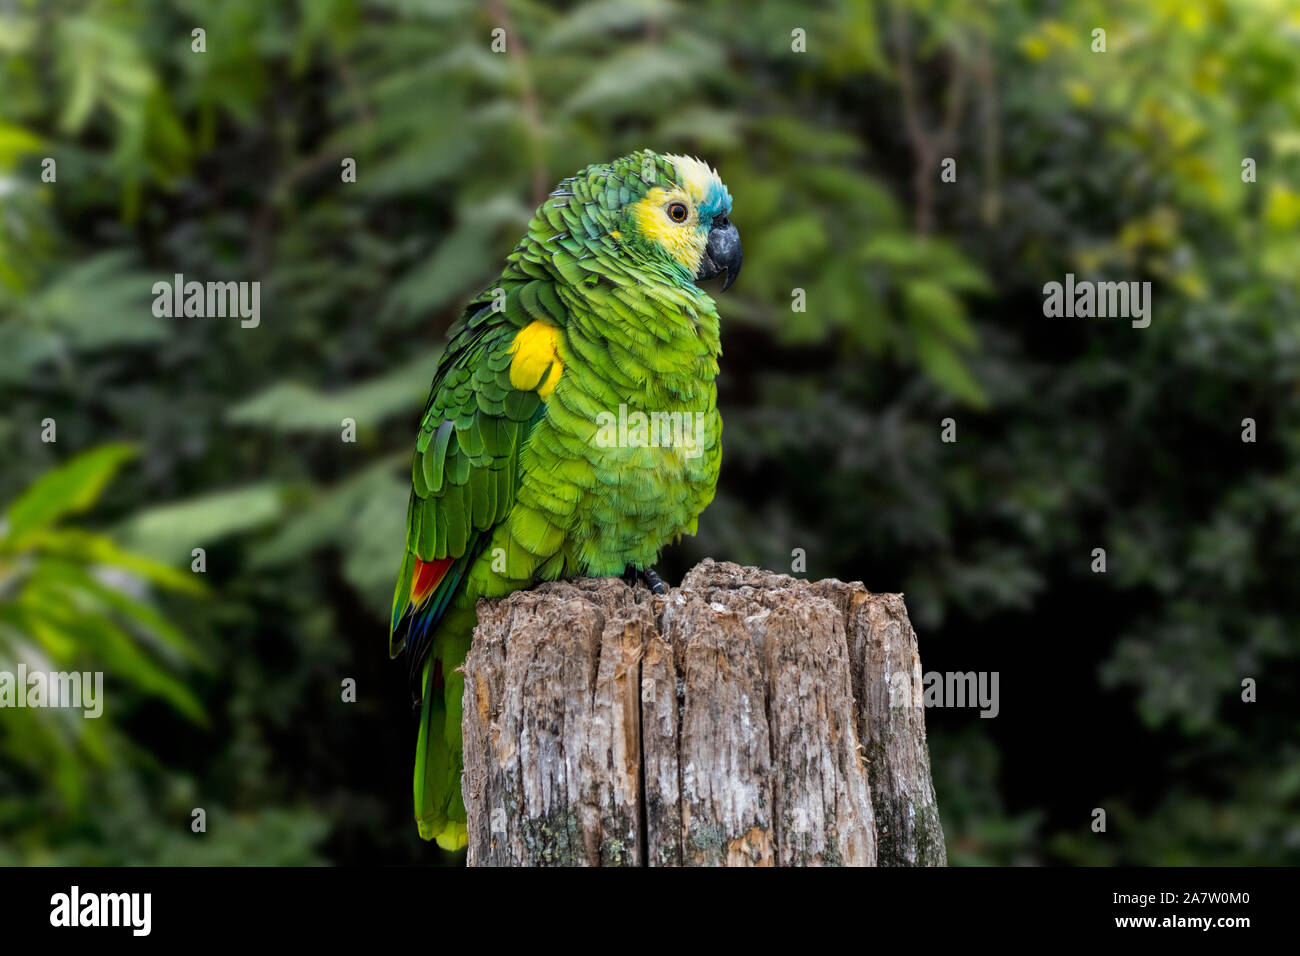 Turquoise-fronted amazon / turquoise-fronted parrot / blue-fronted amazon  (Amazona aestiva), South American species of amazon parrot Stock Photo